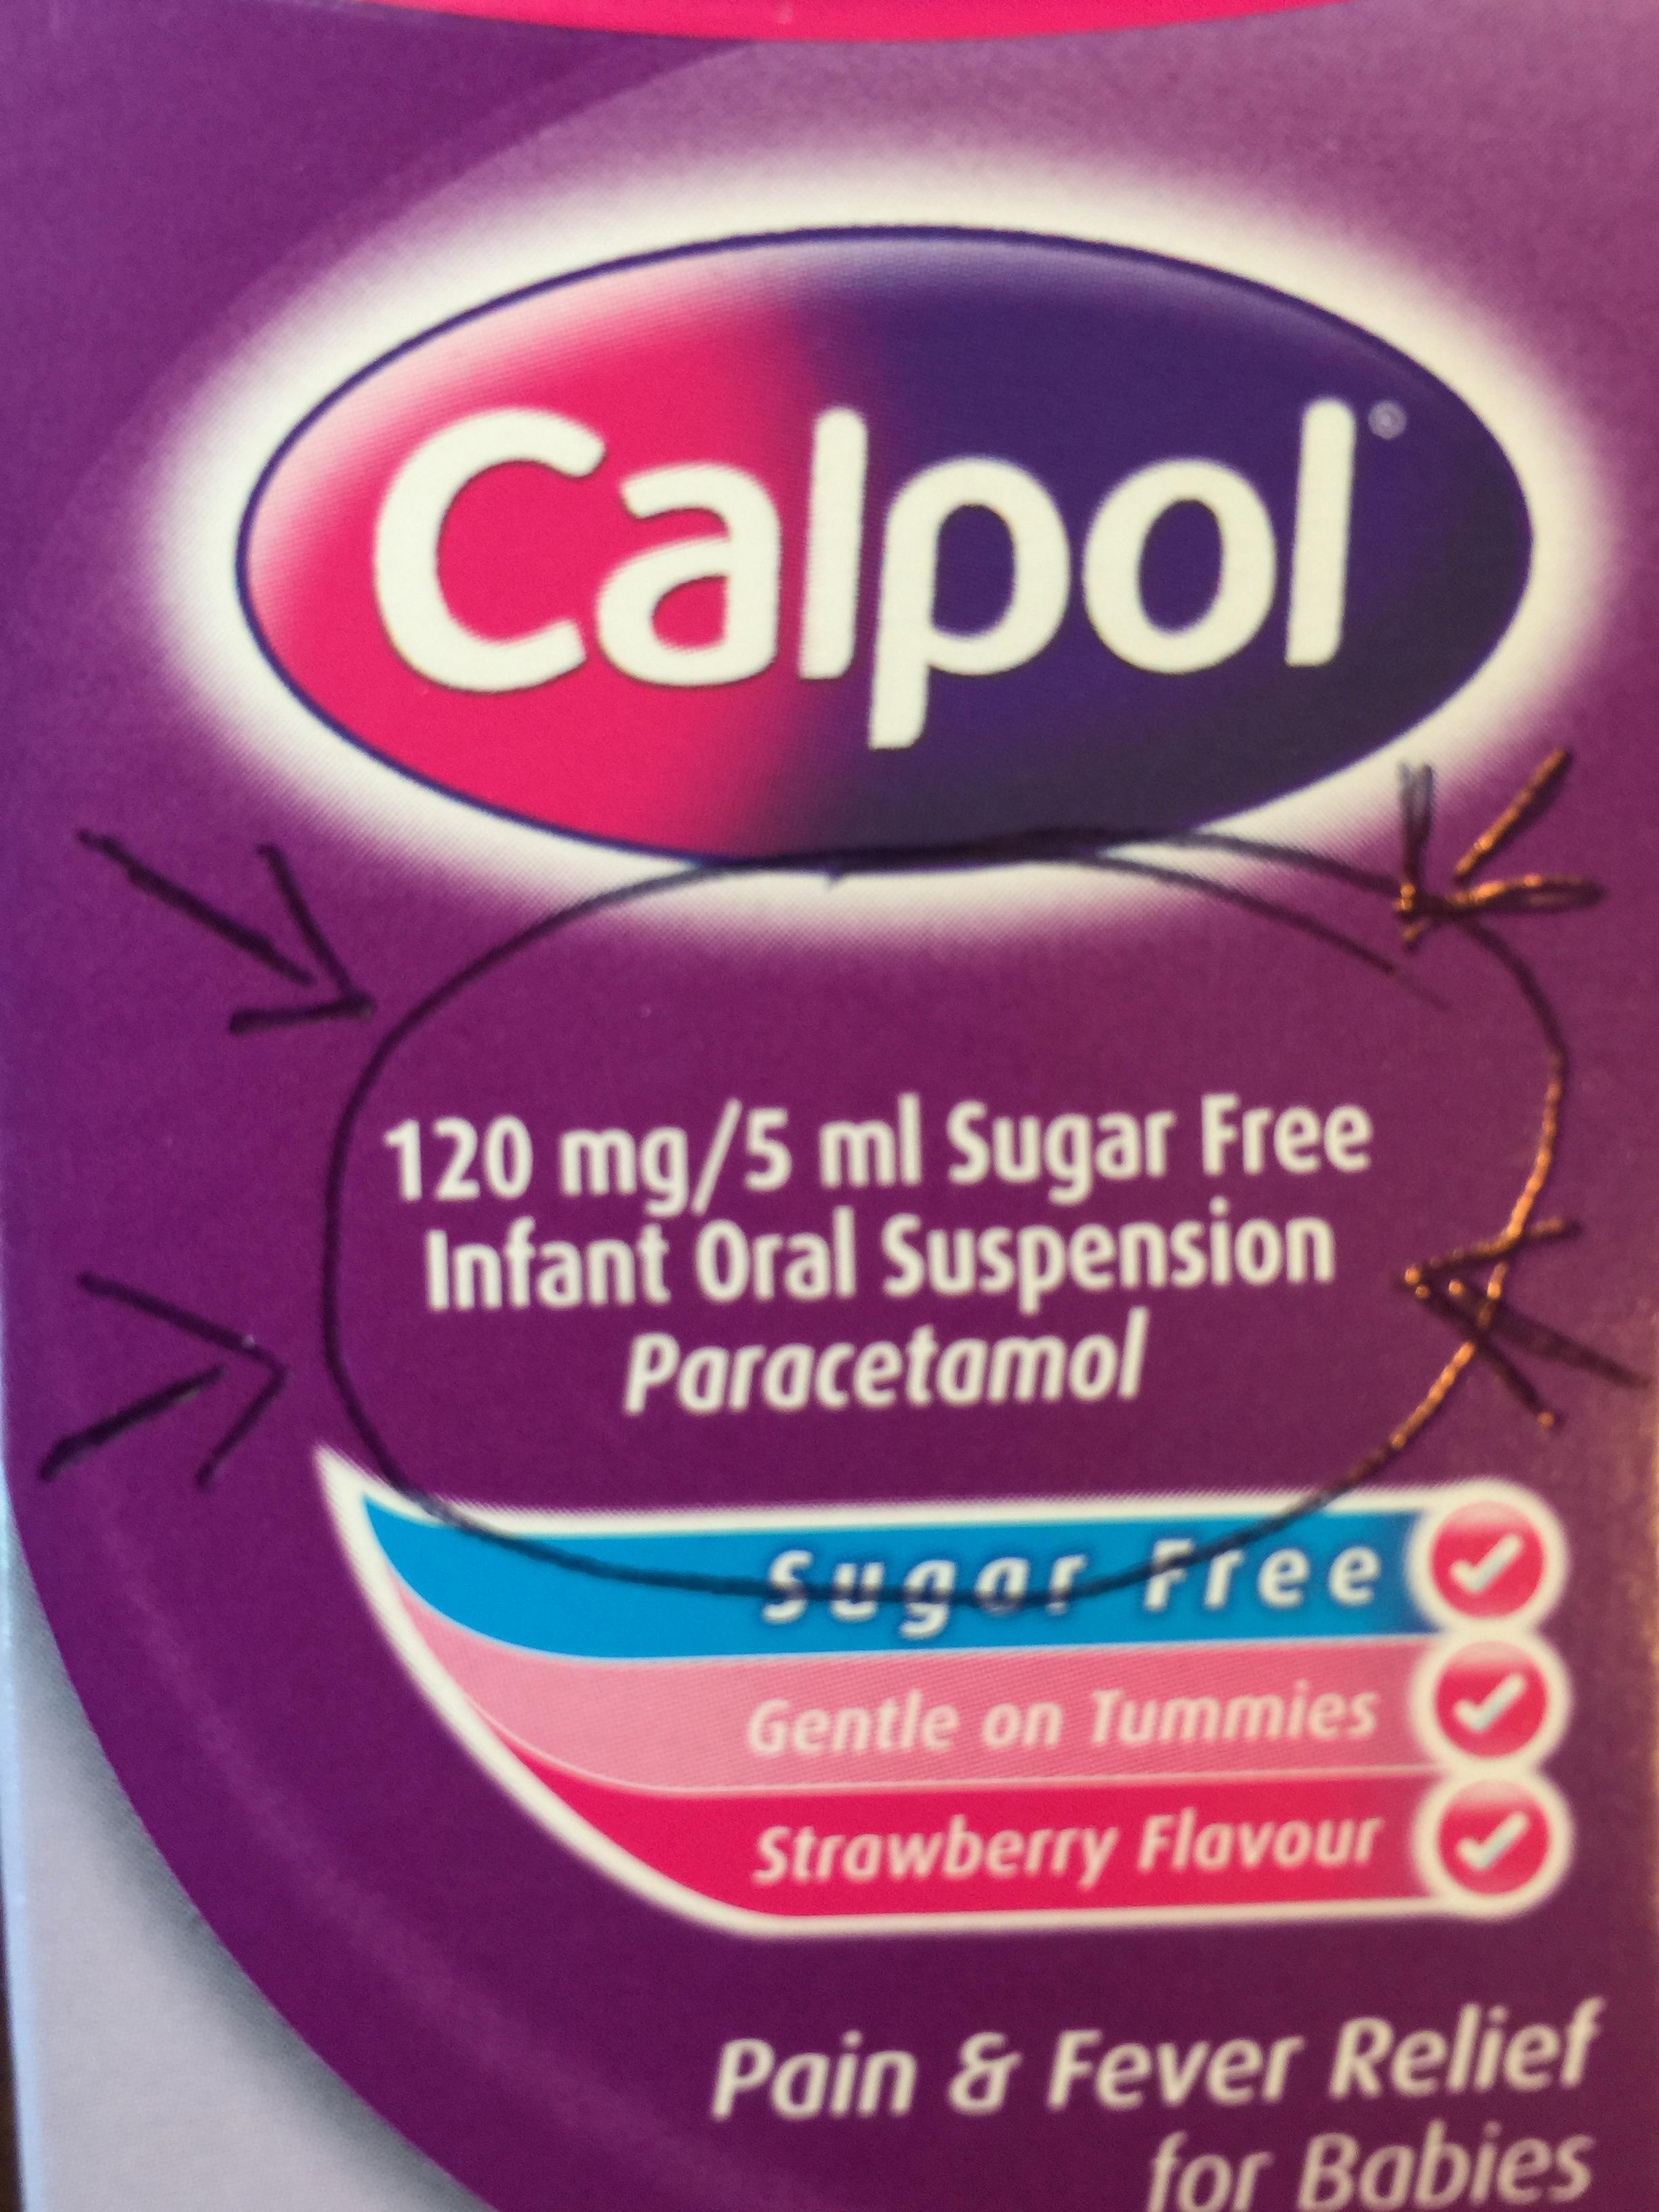  Can Calpol and Nurofen Be Taken Together?